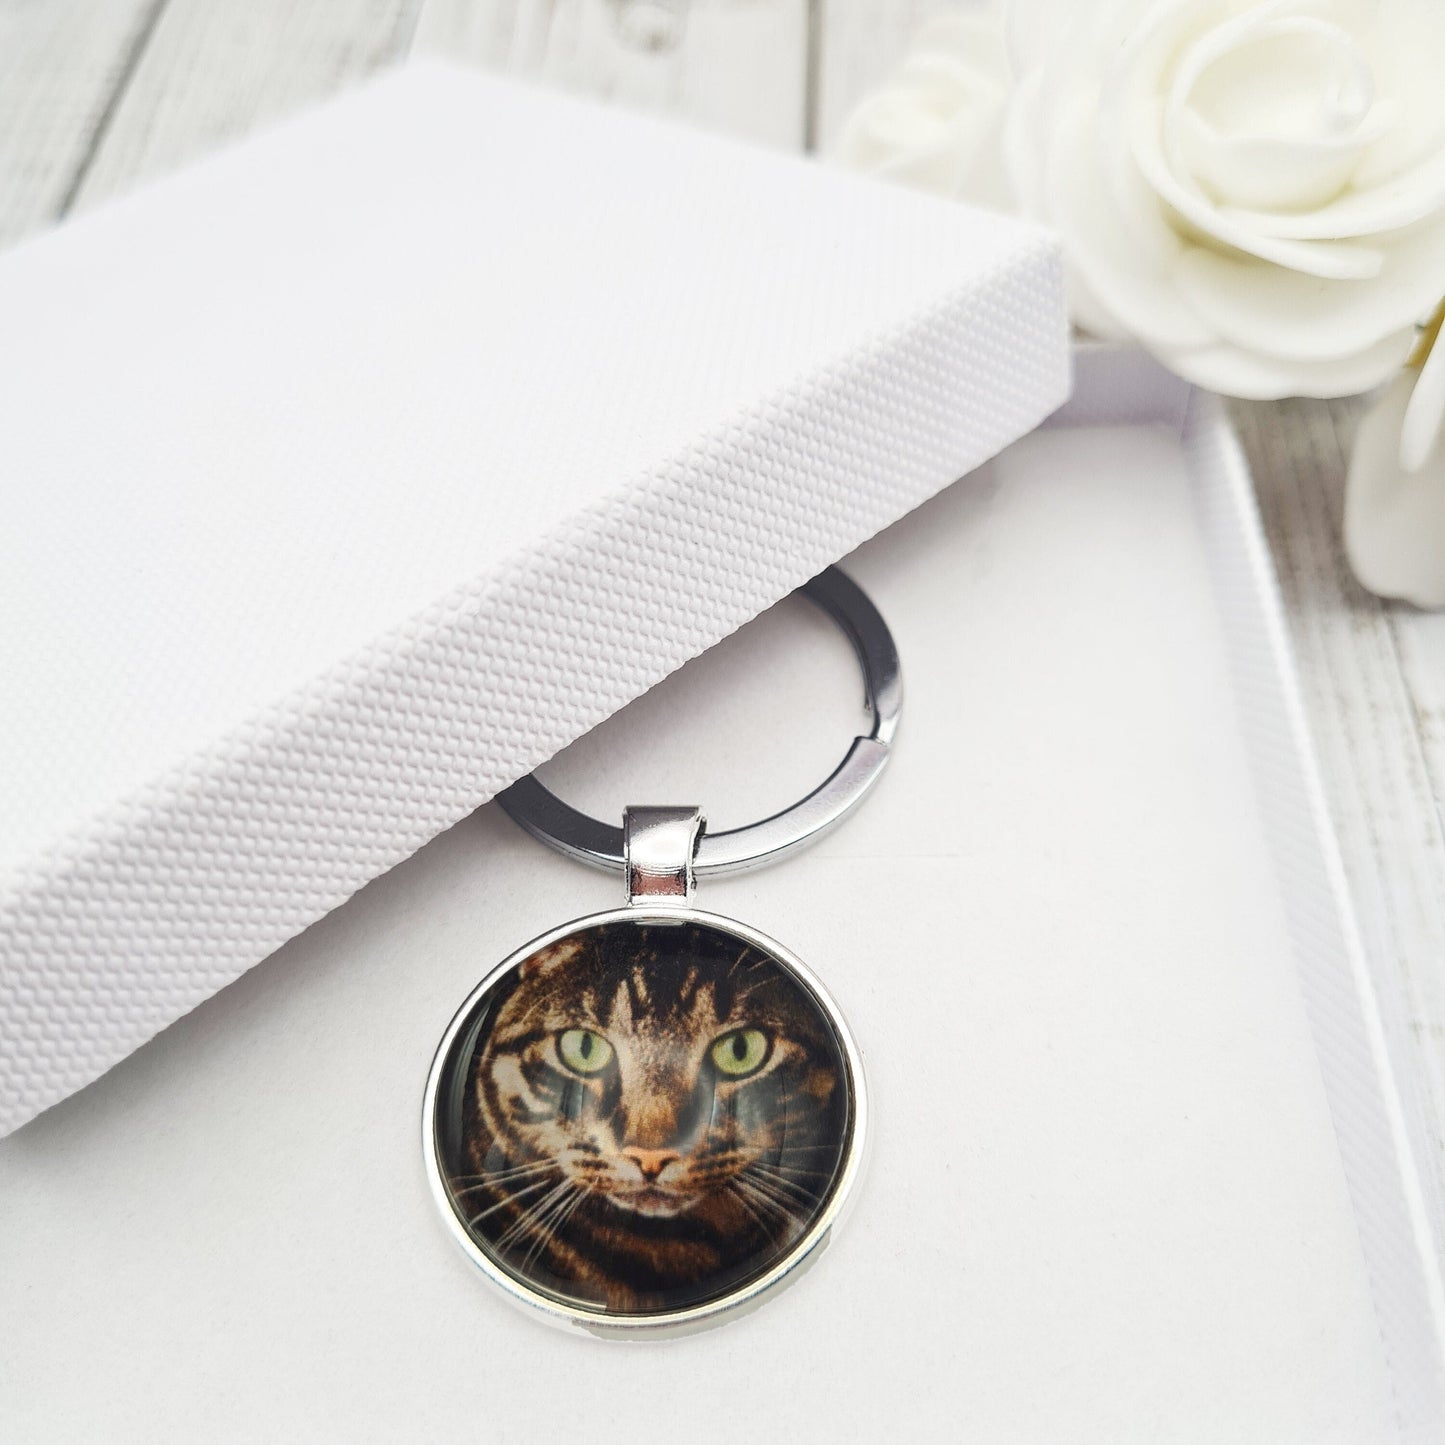 Stainless steel keyring with pet photo set in glass inside a decorative box